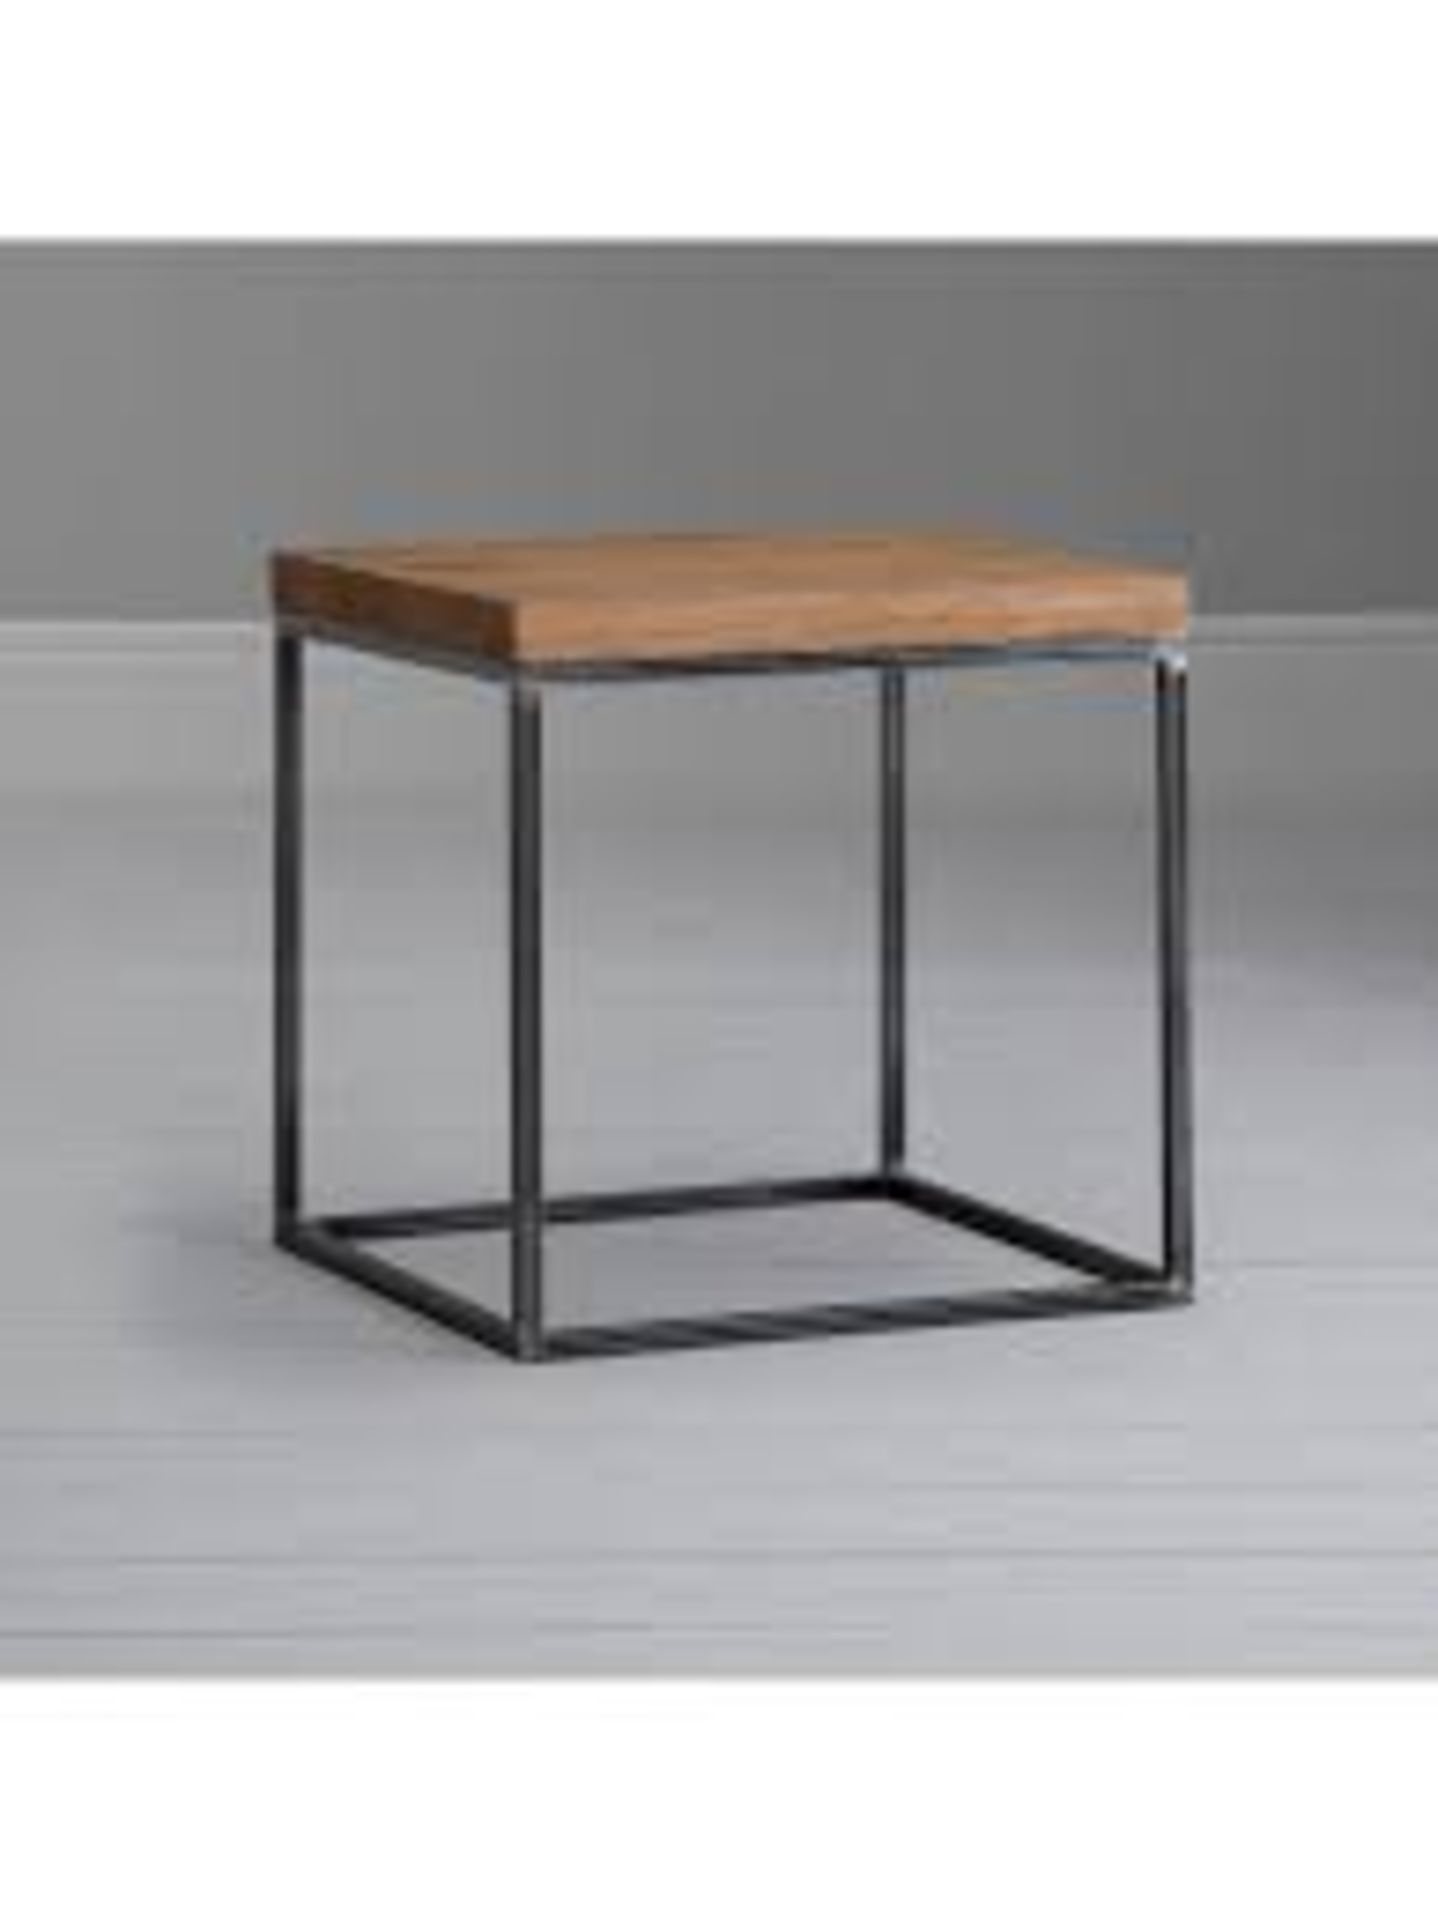 Boxed John Lewis & Partners Calia Side Table RRP £150 (NBW646770) (Pictures Are For Illustration